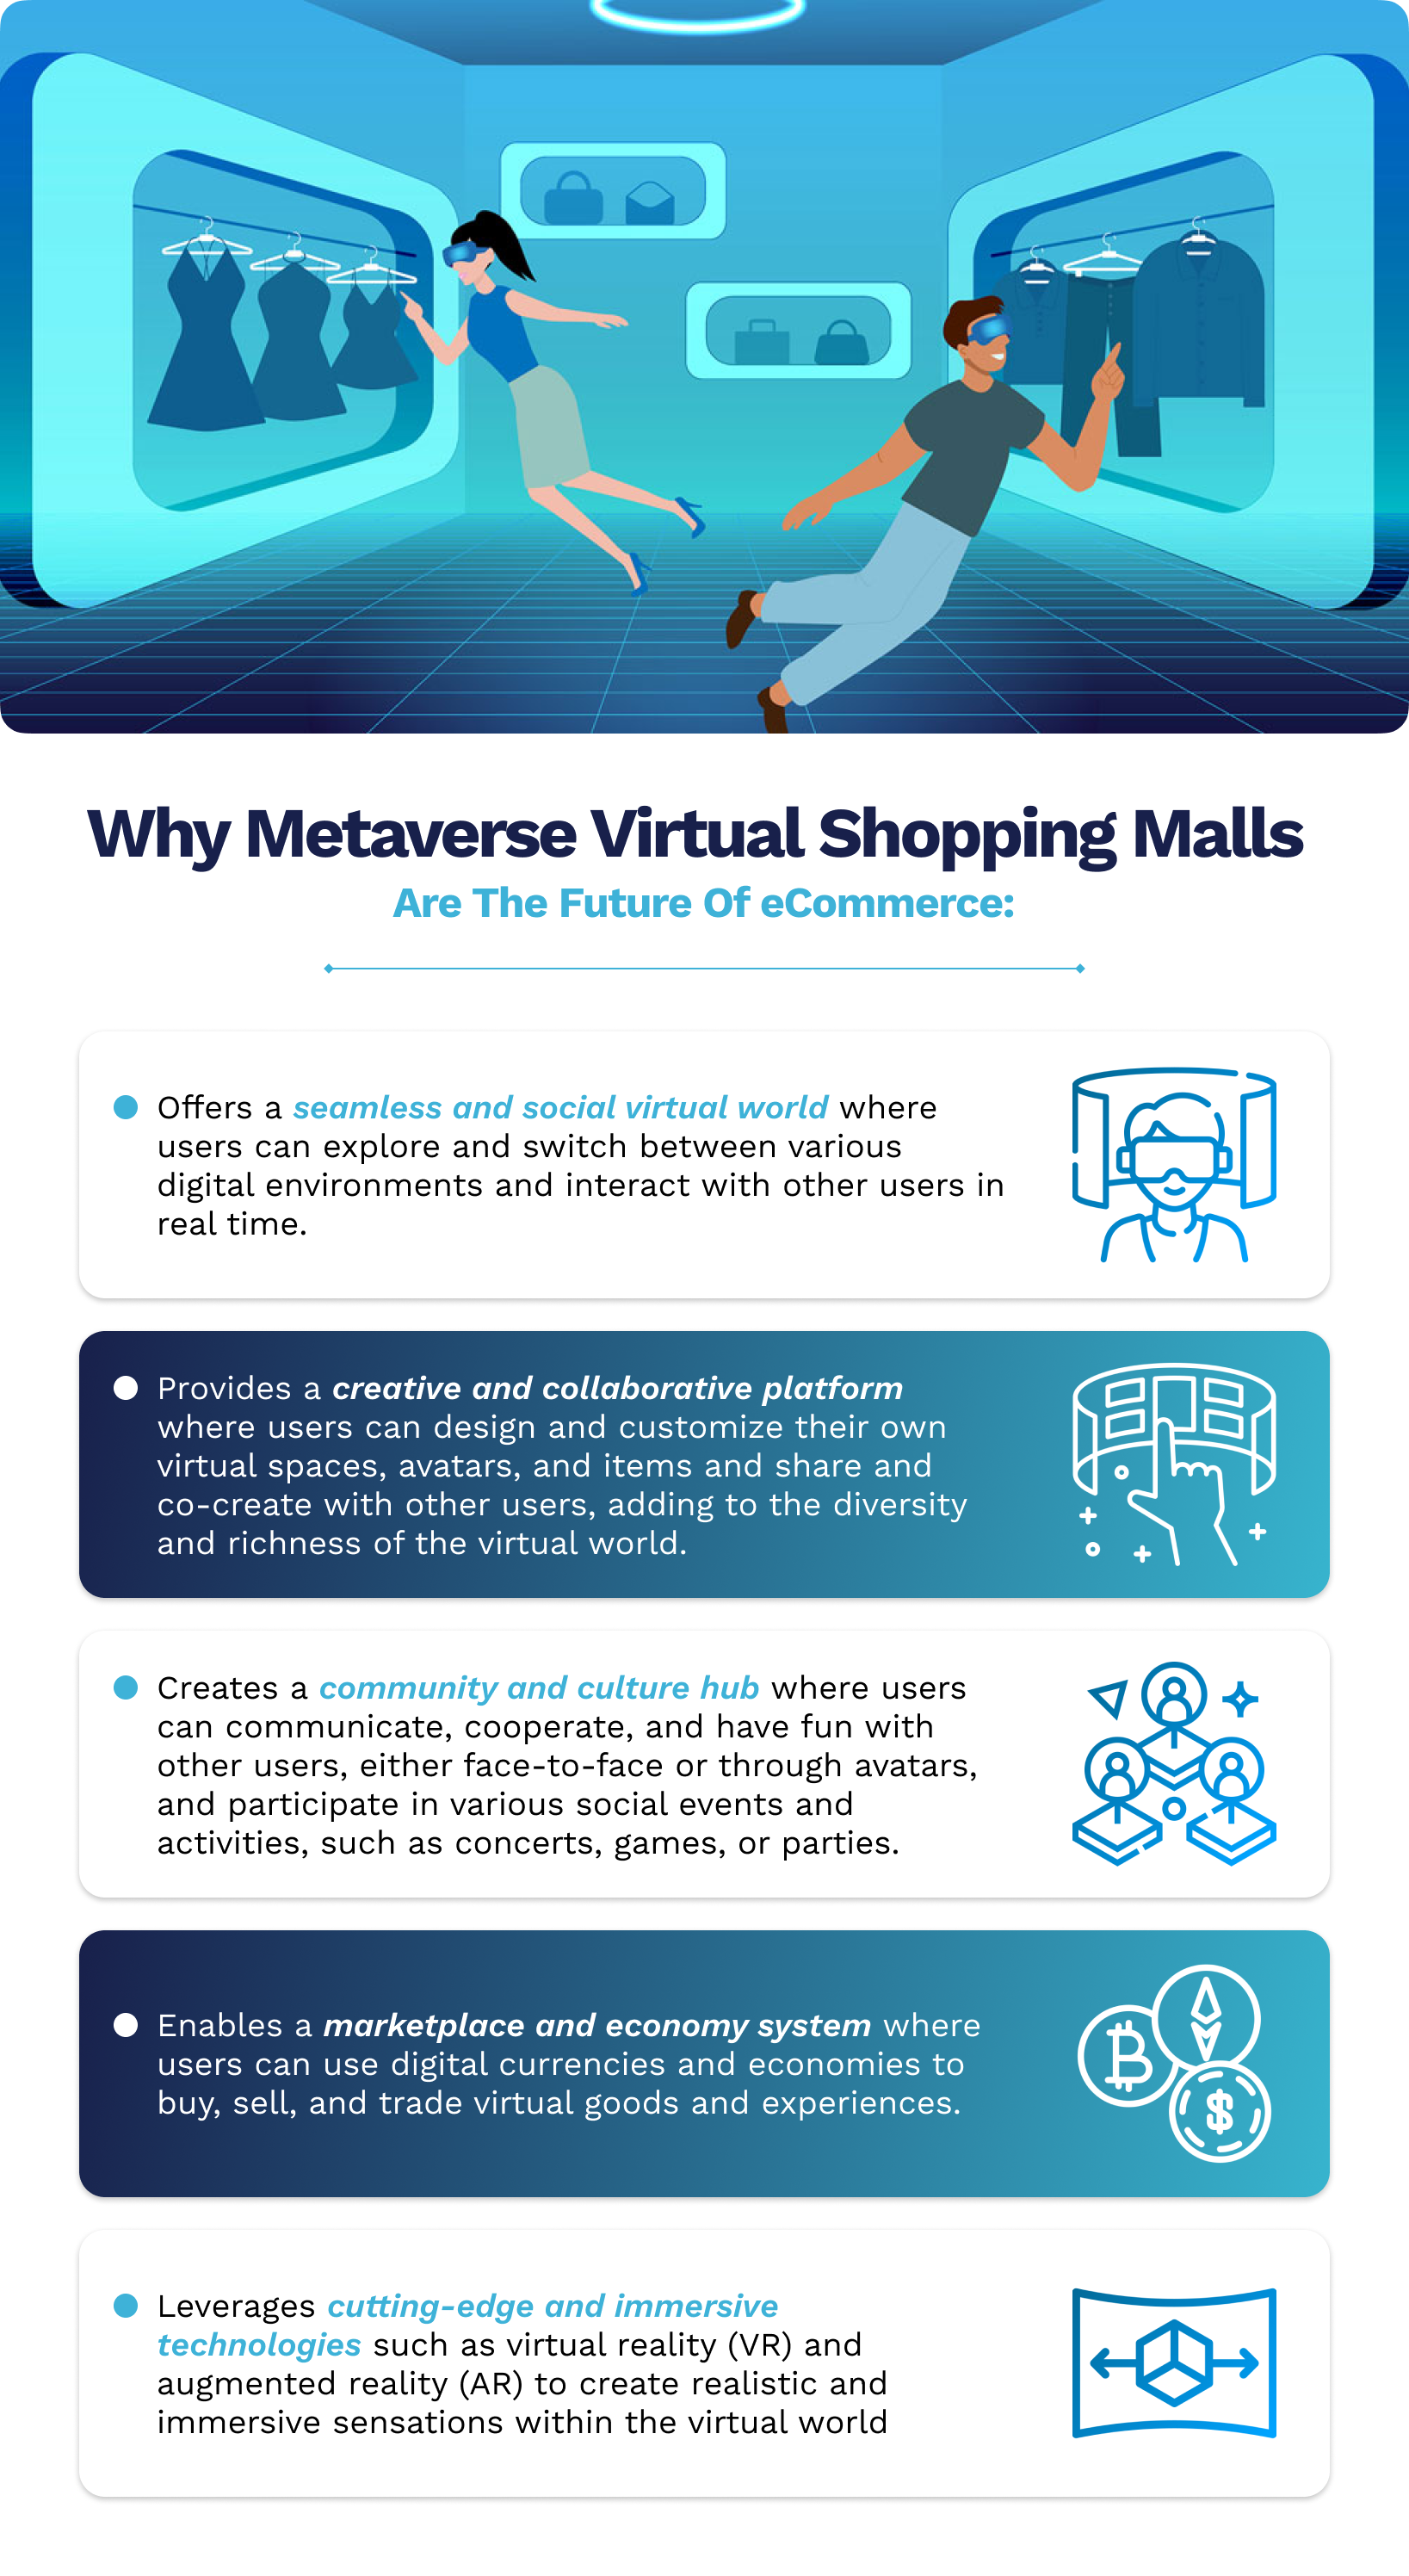 Why Metaverse Virtual Shopping Malls Are The Future Of eCommerce